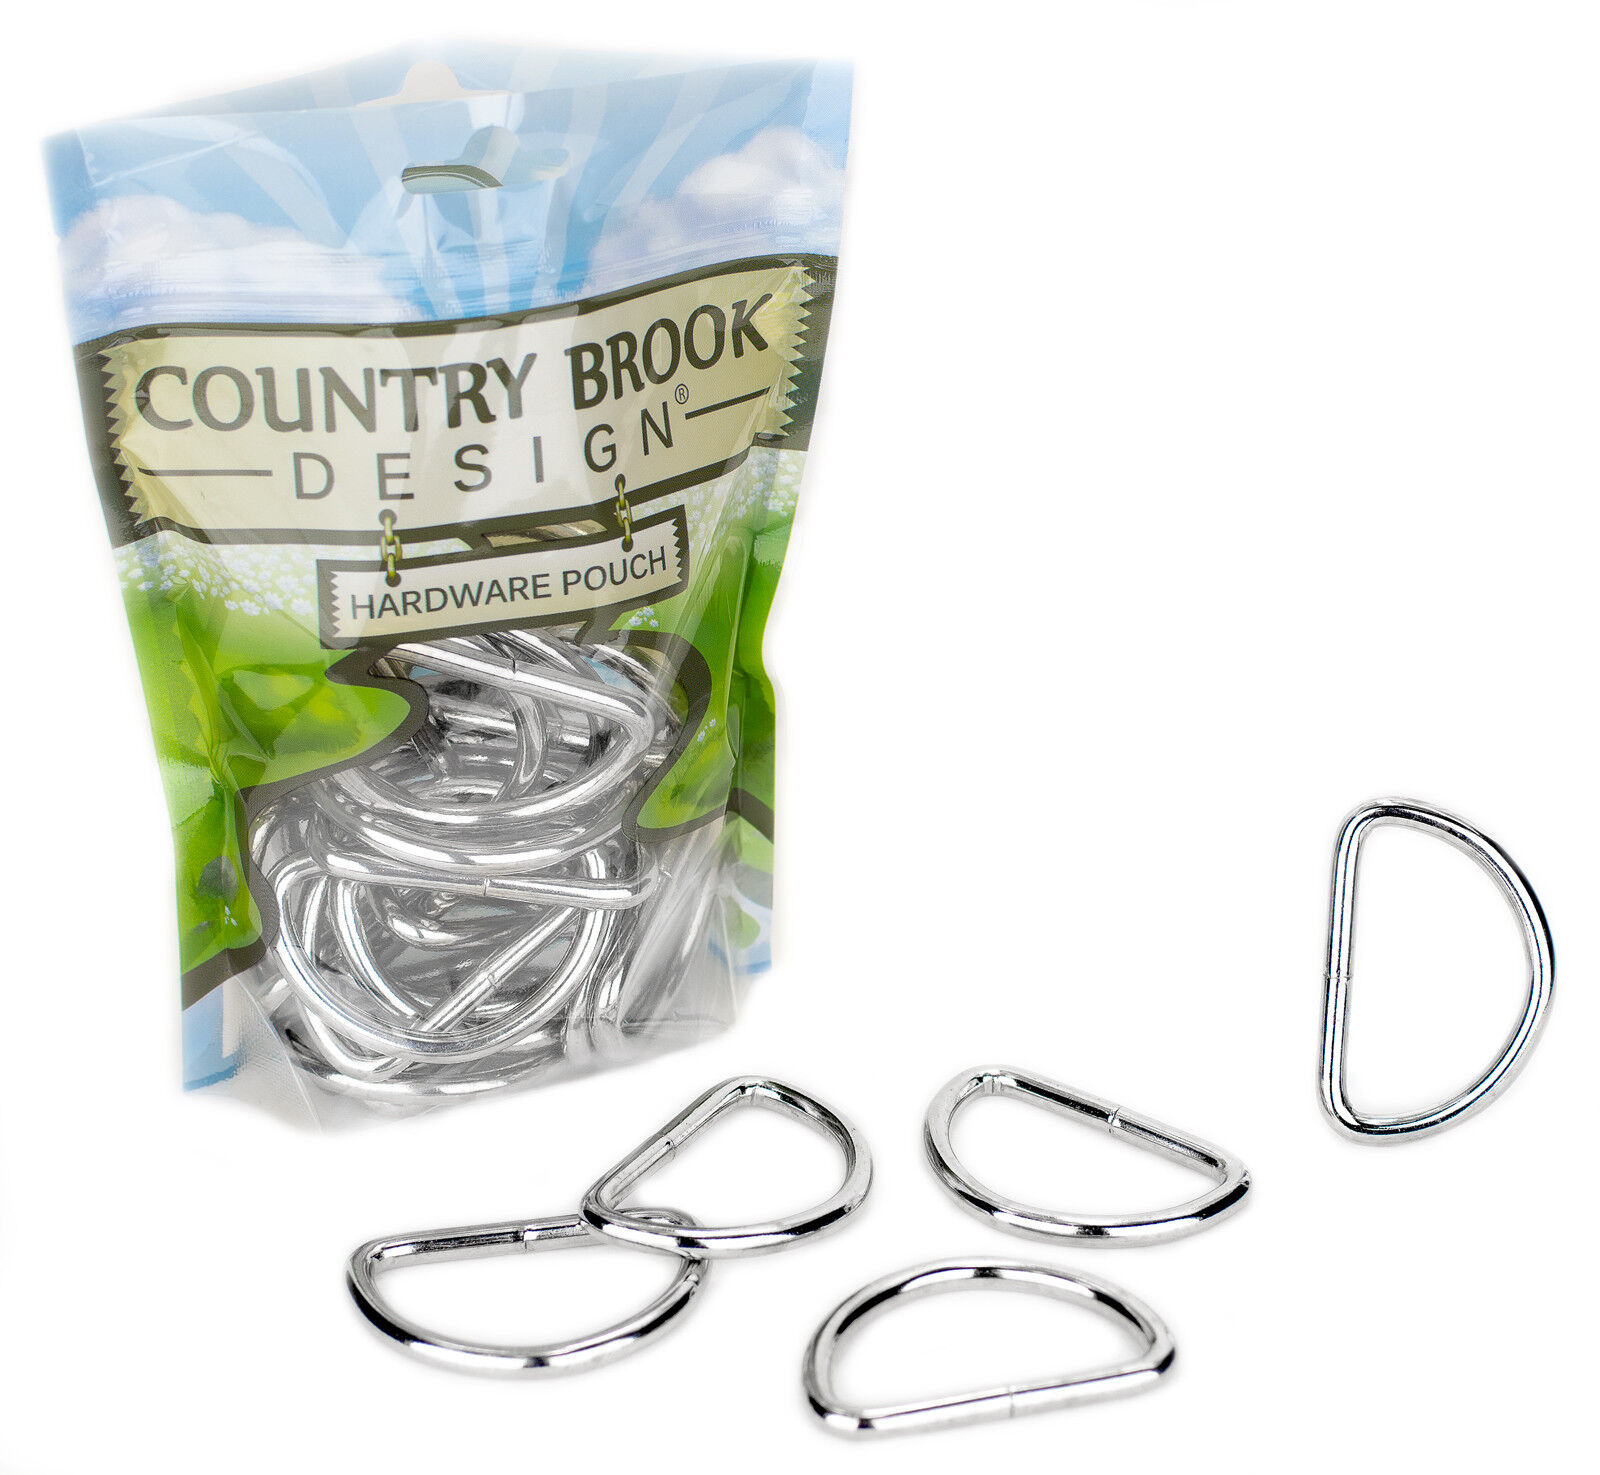 25 - Country Brook Design® Free shipping on posting reviews 2 Free Shipping New Inch Welded D-Rings